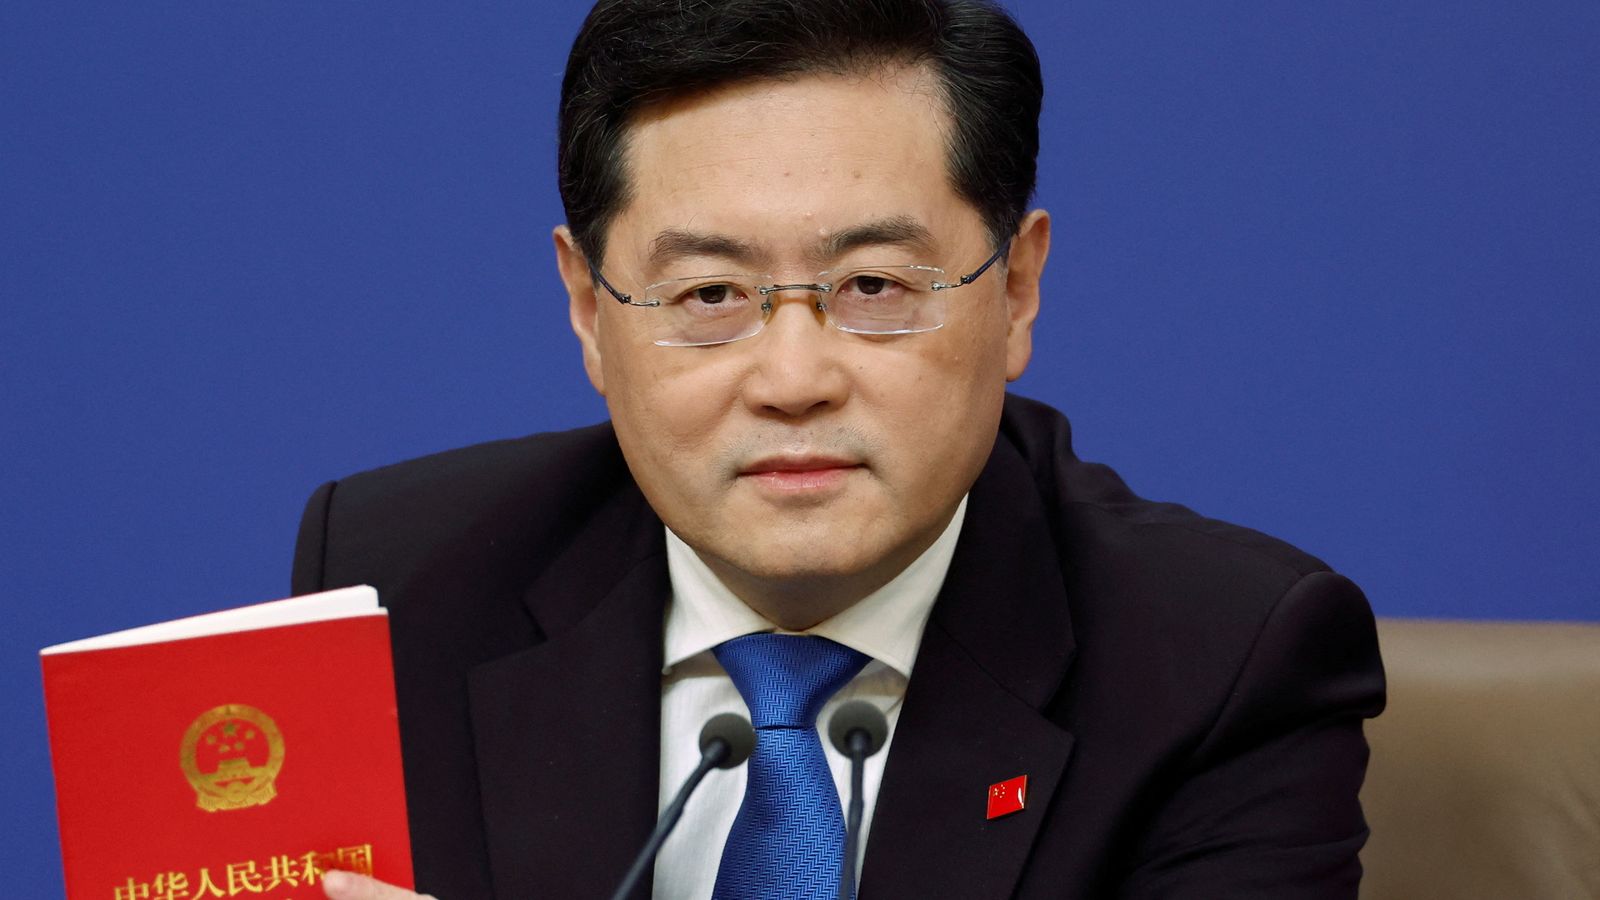 Qin Gang: China's outspoken foreign minister removed from office after weeks of unexplained absence